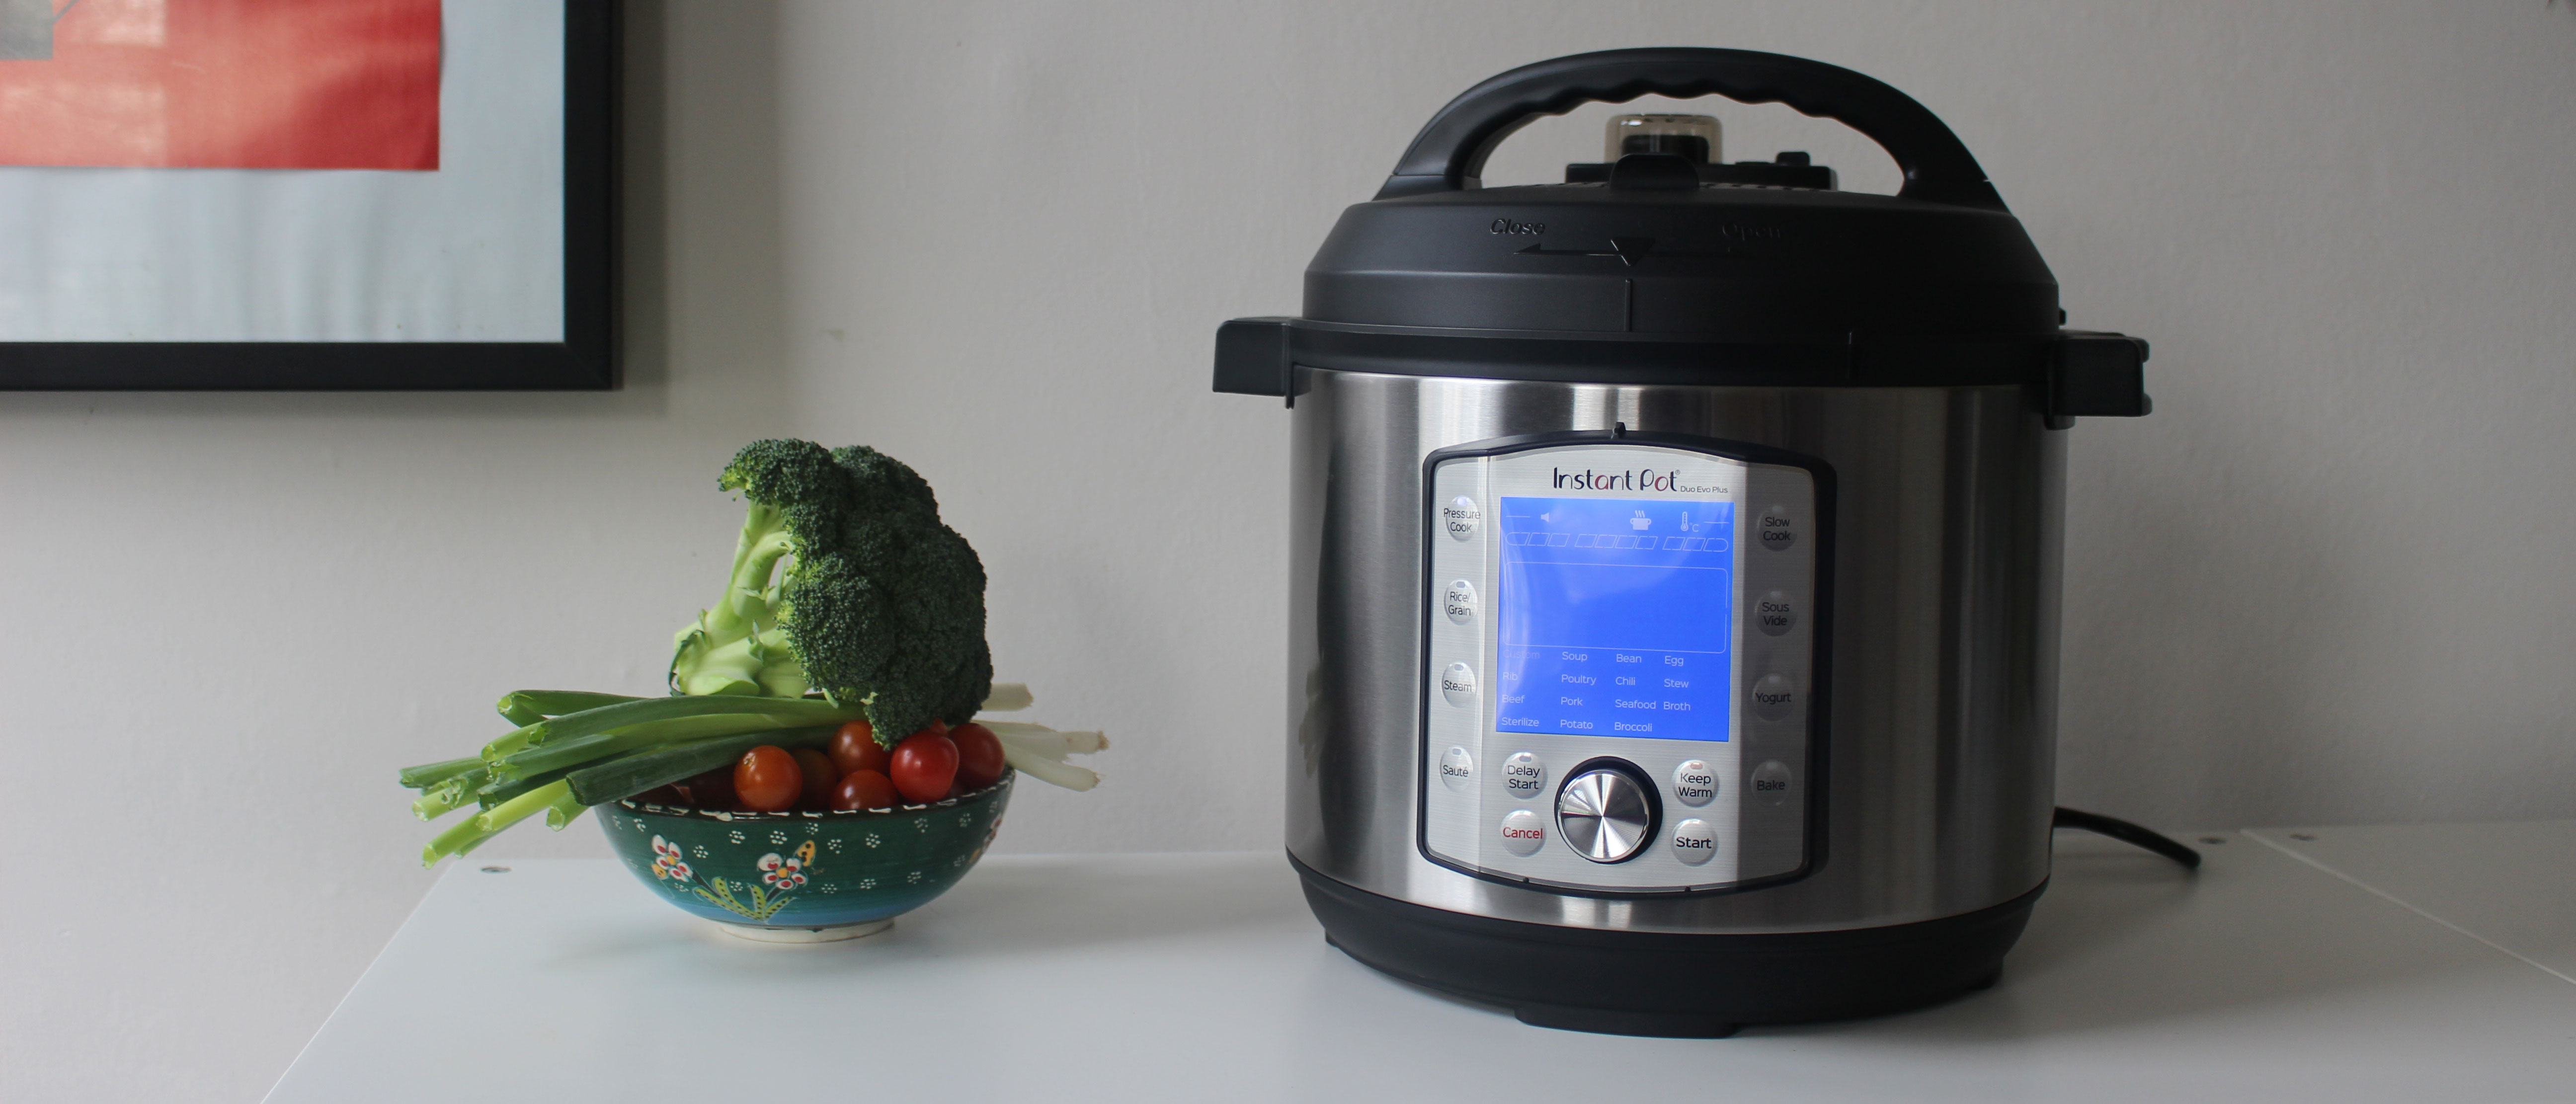 Instant Pot Duo Evo Plus review: Delightfully stylish and feature-packed